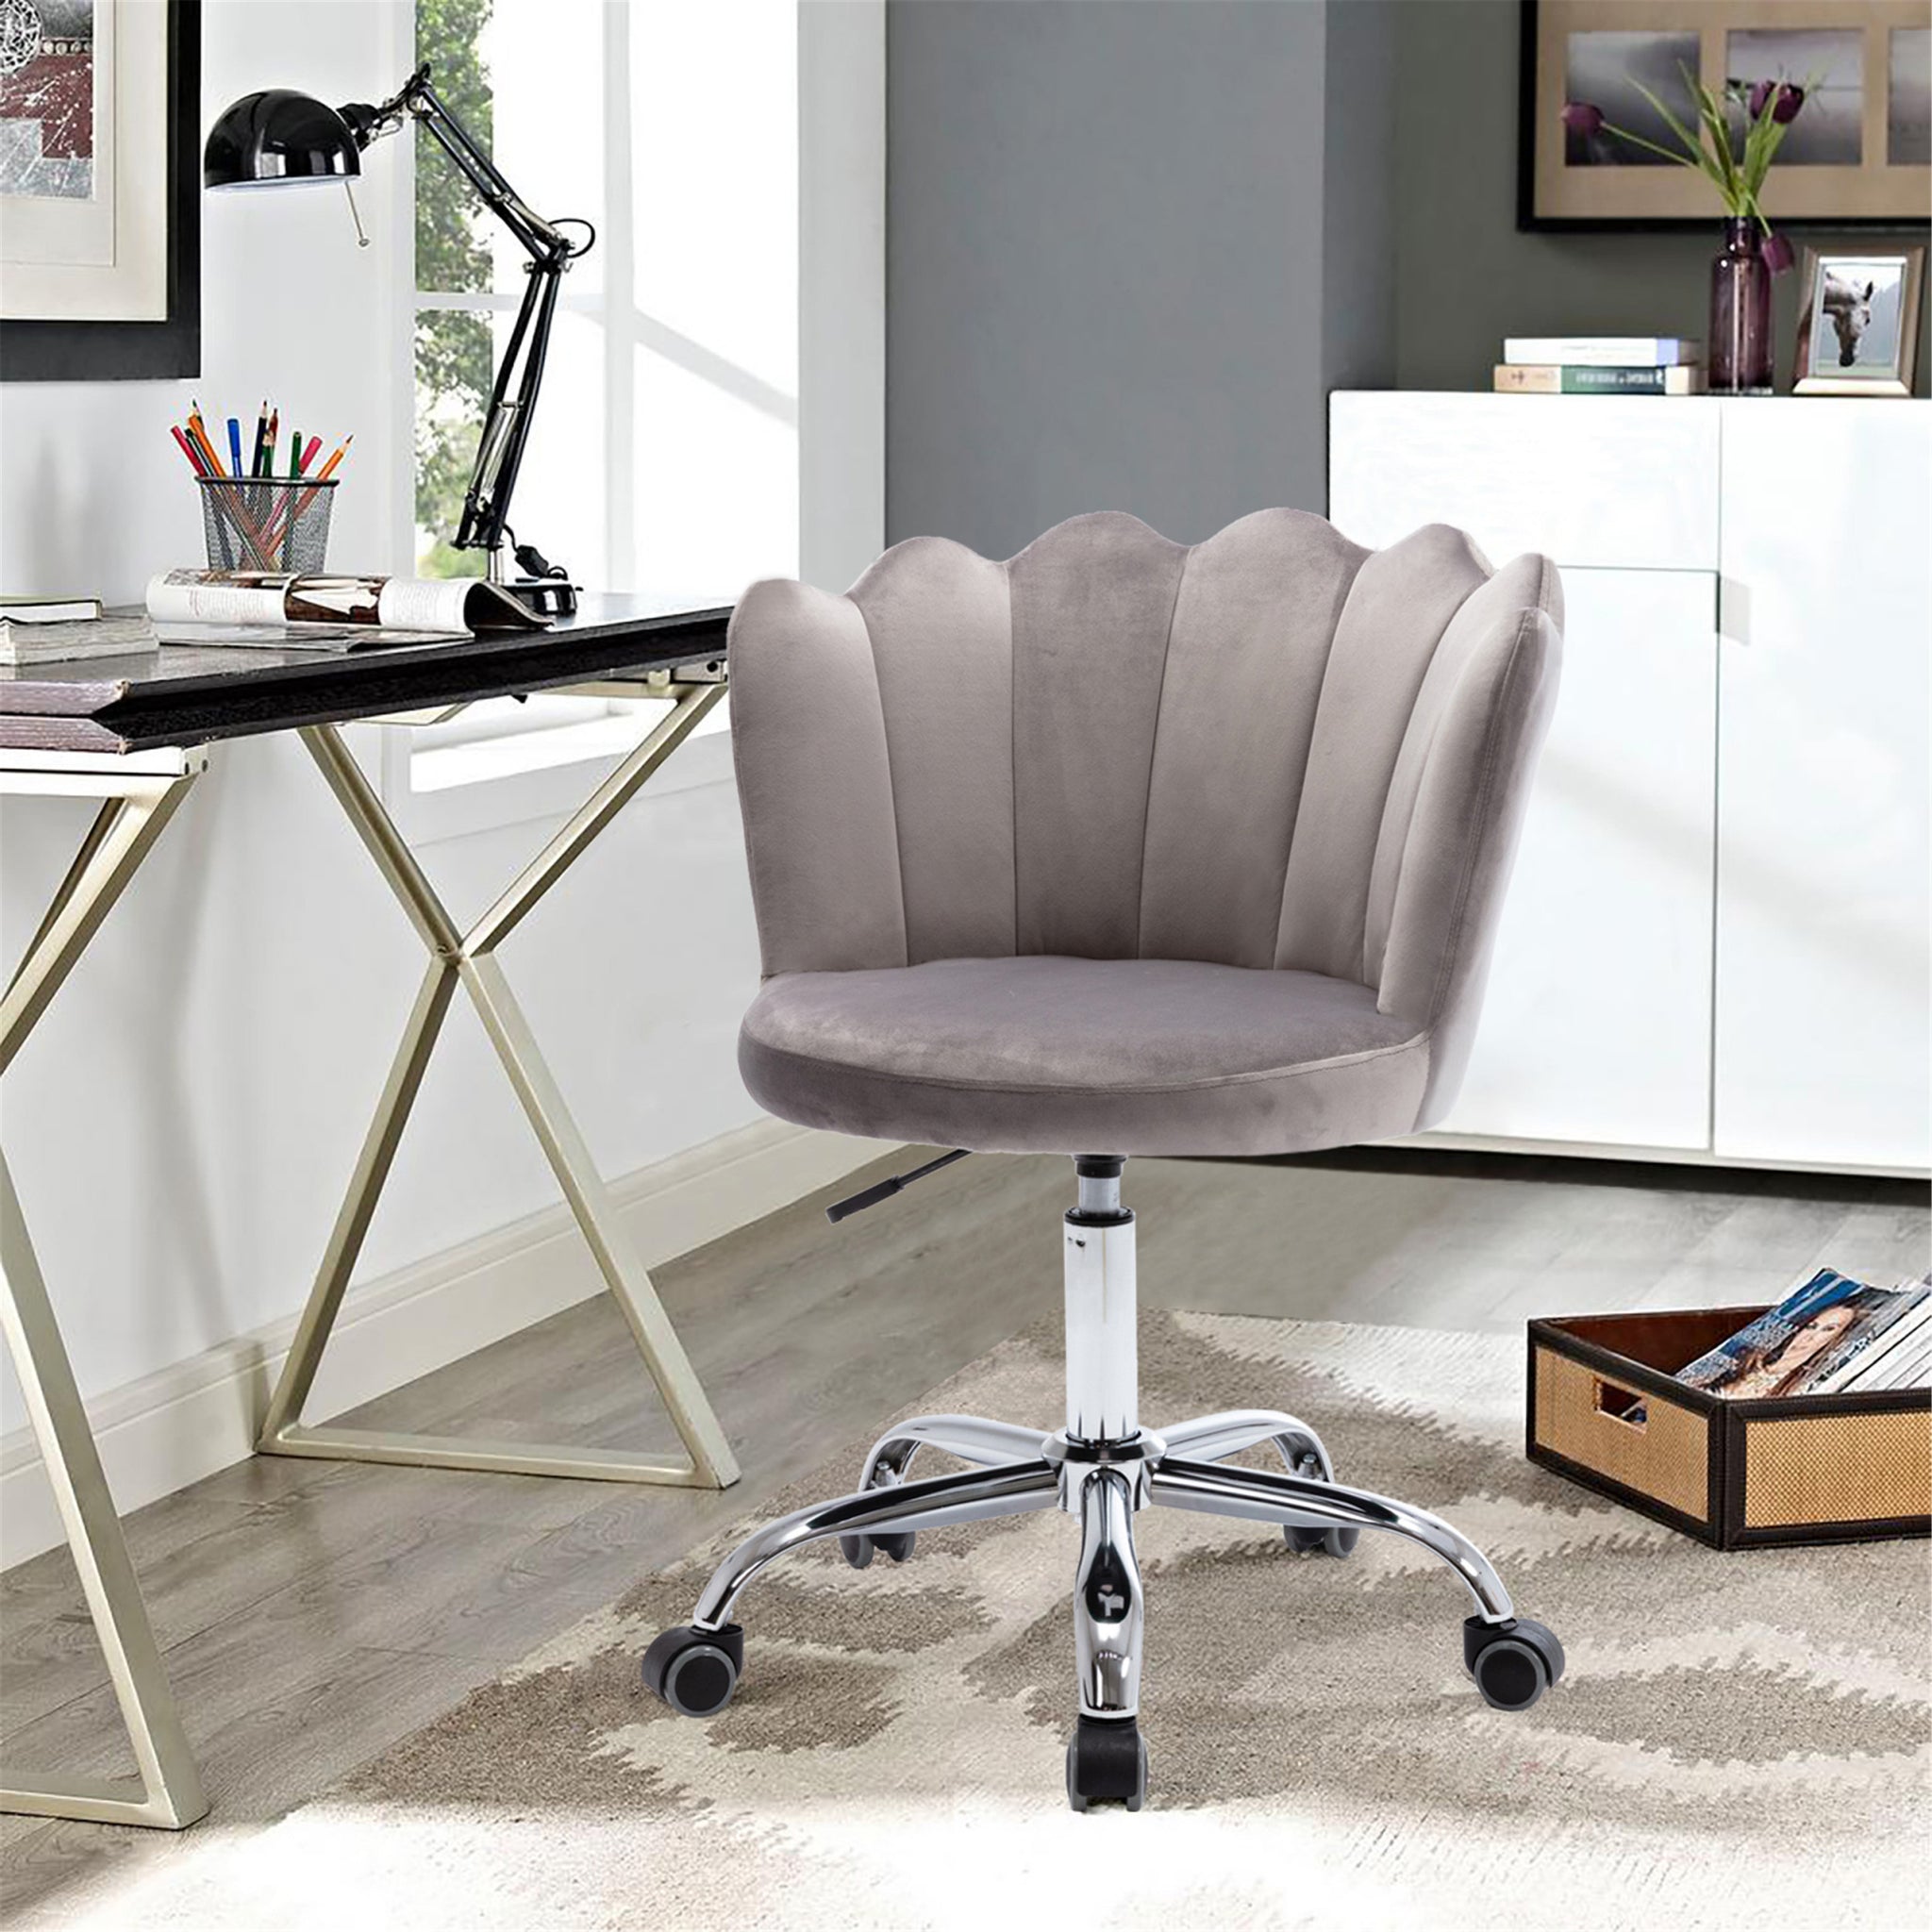 COOLMORE Swivel Shell Chair for Living Room Bed Room gray-metal